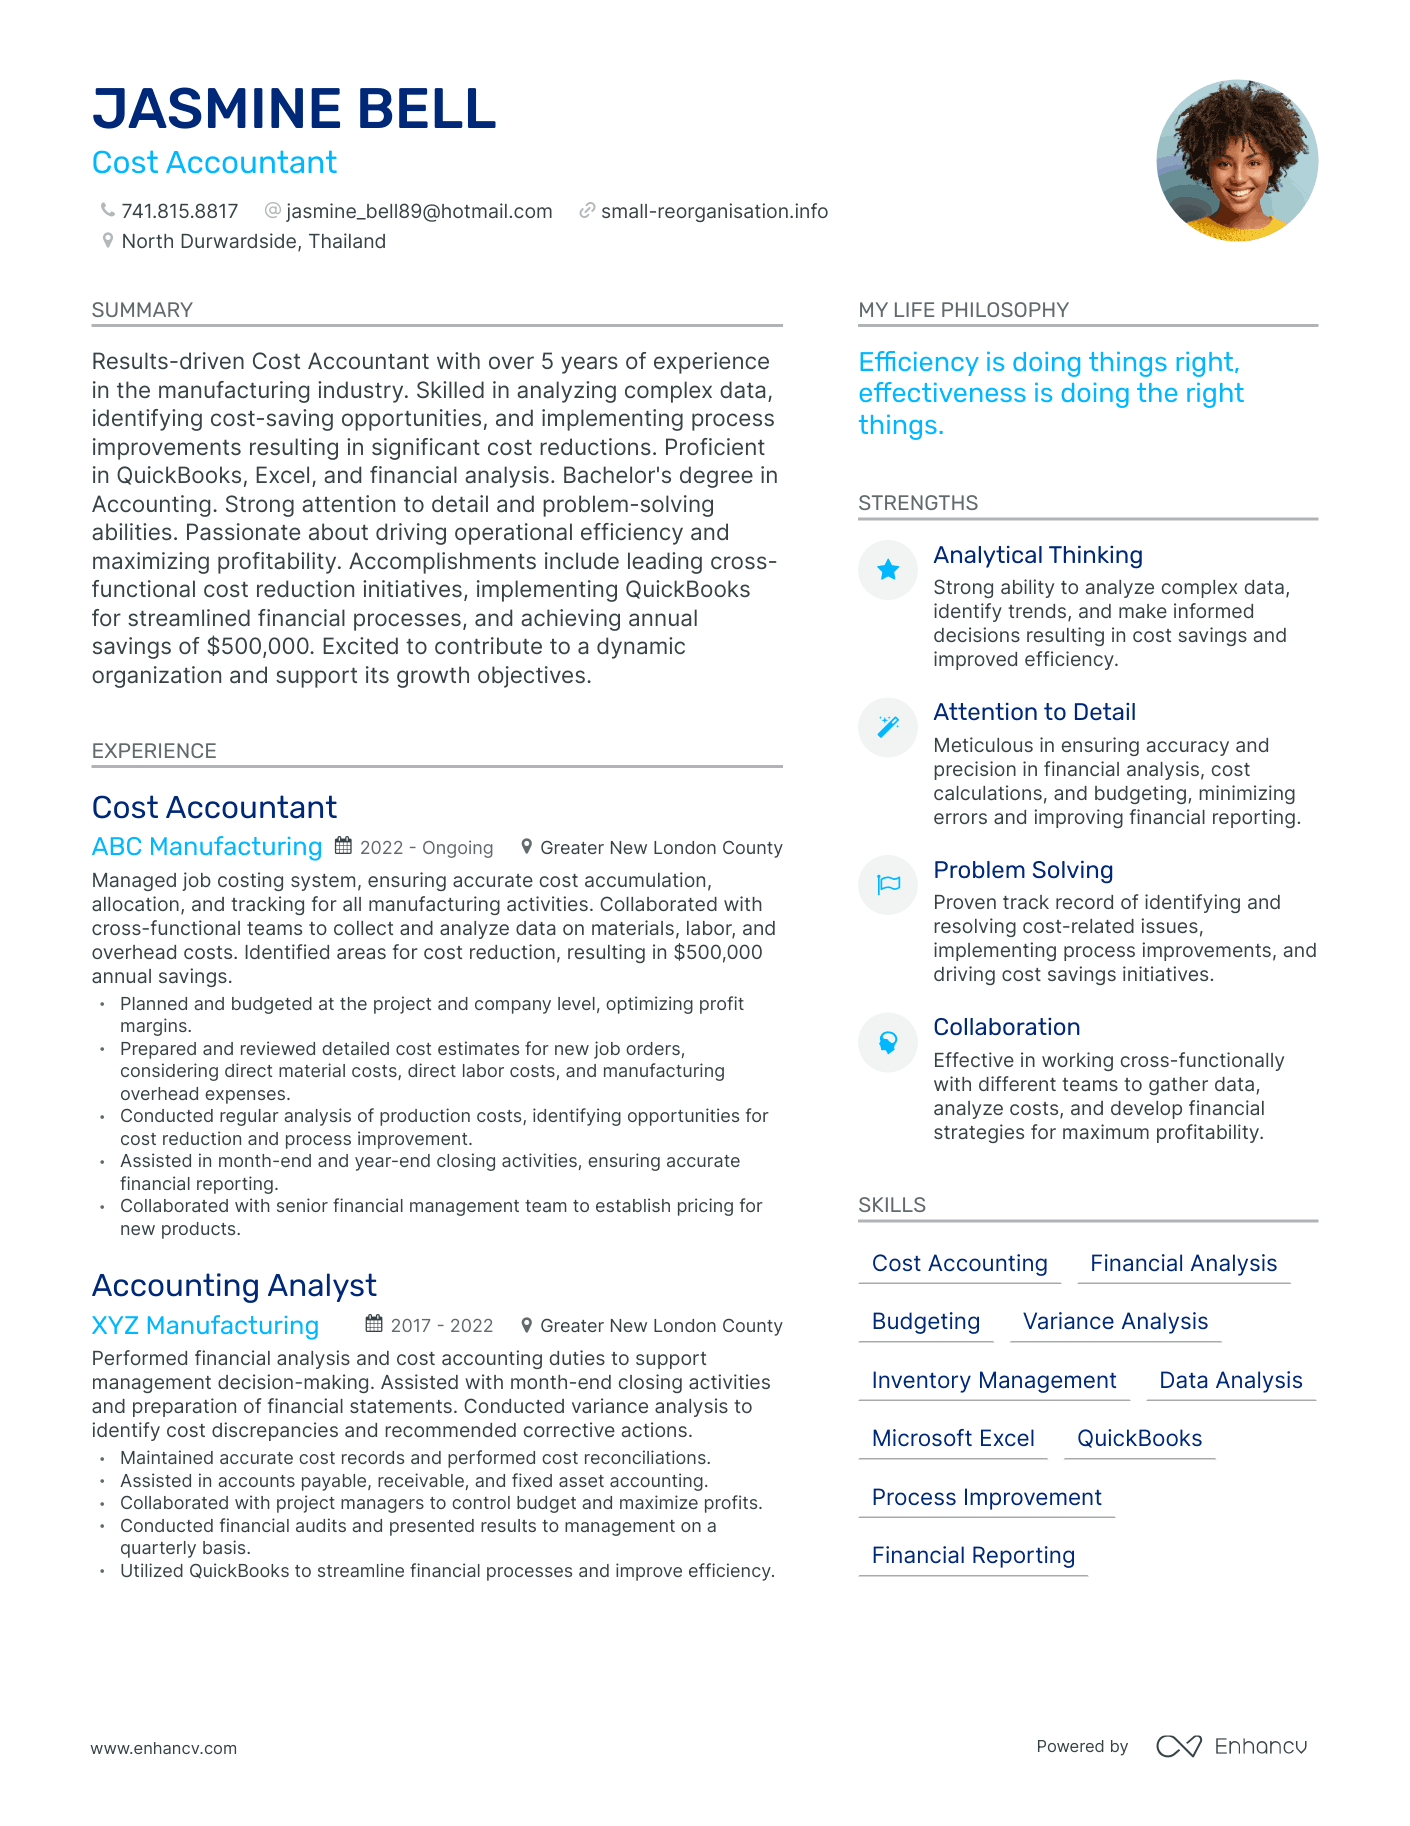 Cost Accountant resume example